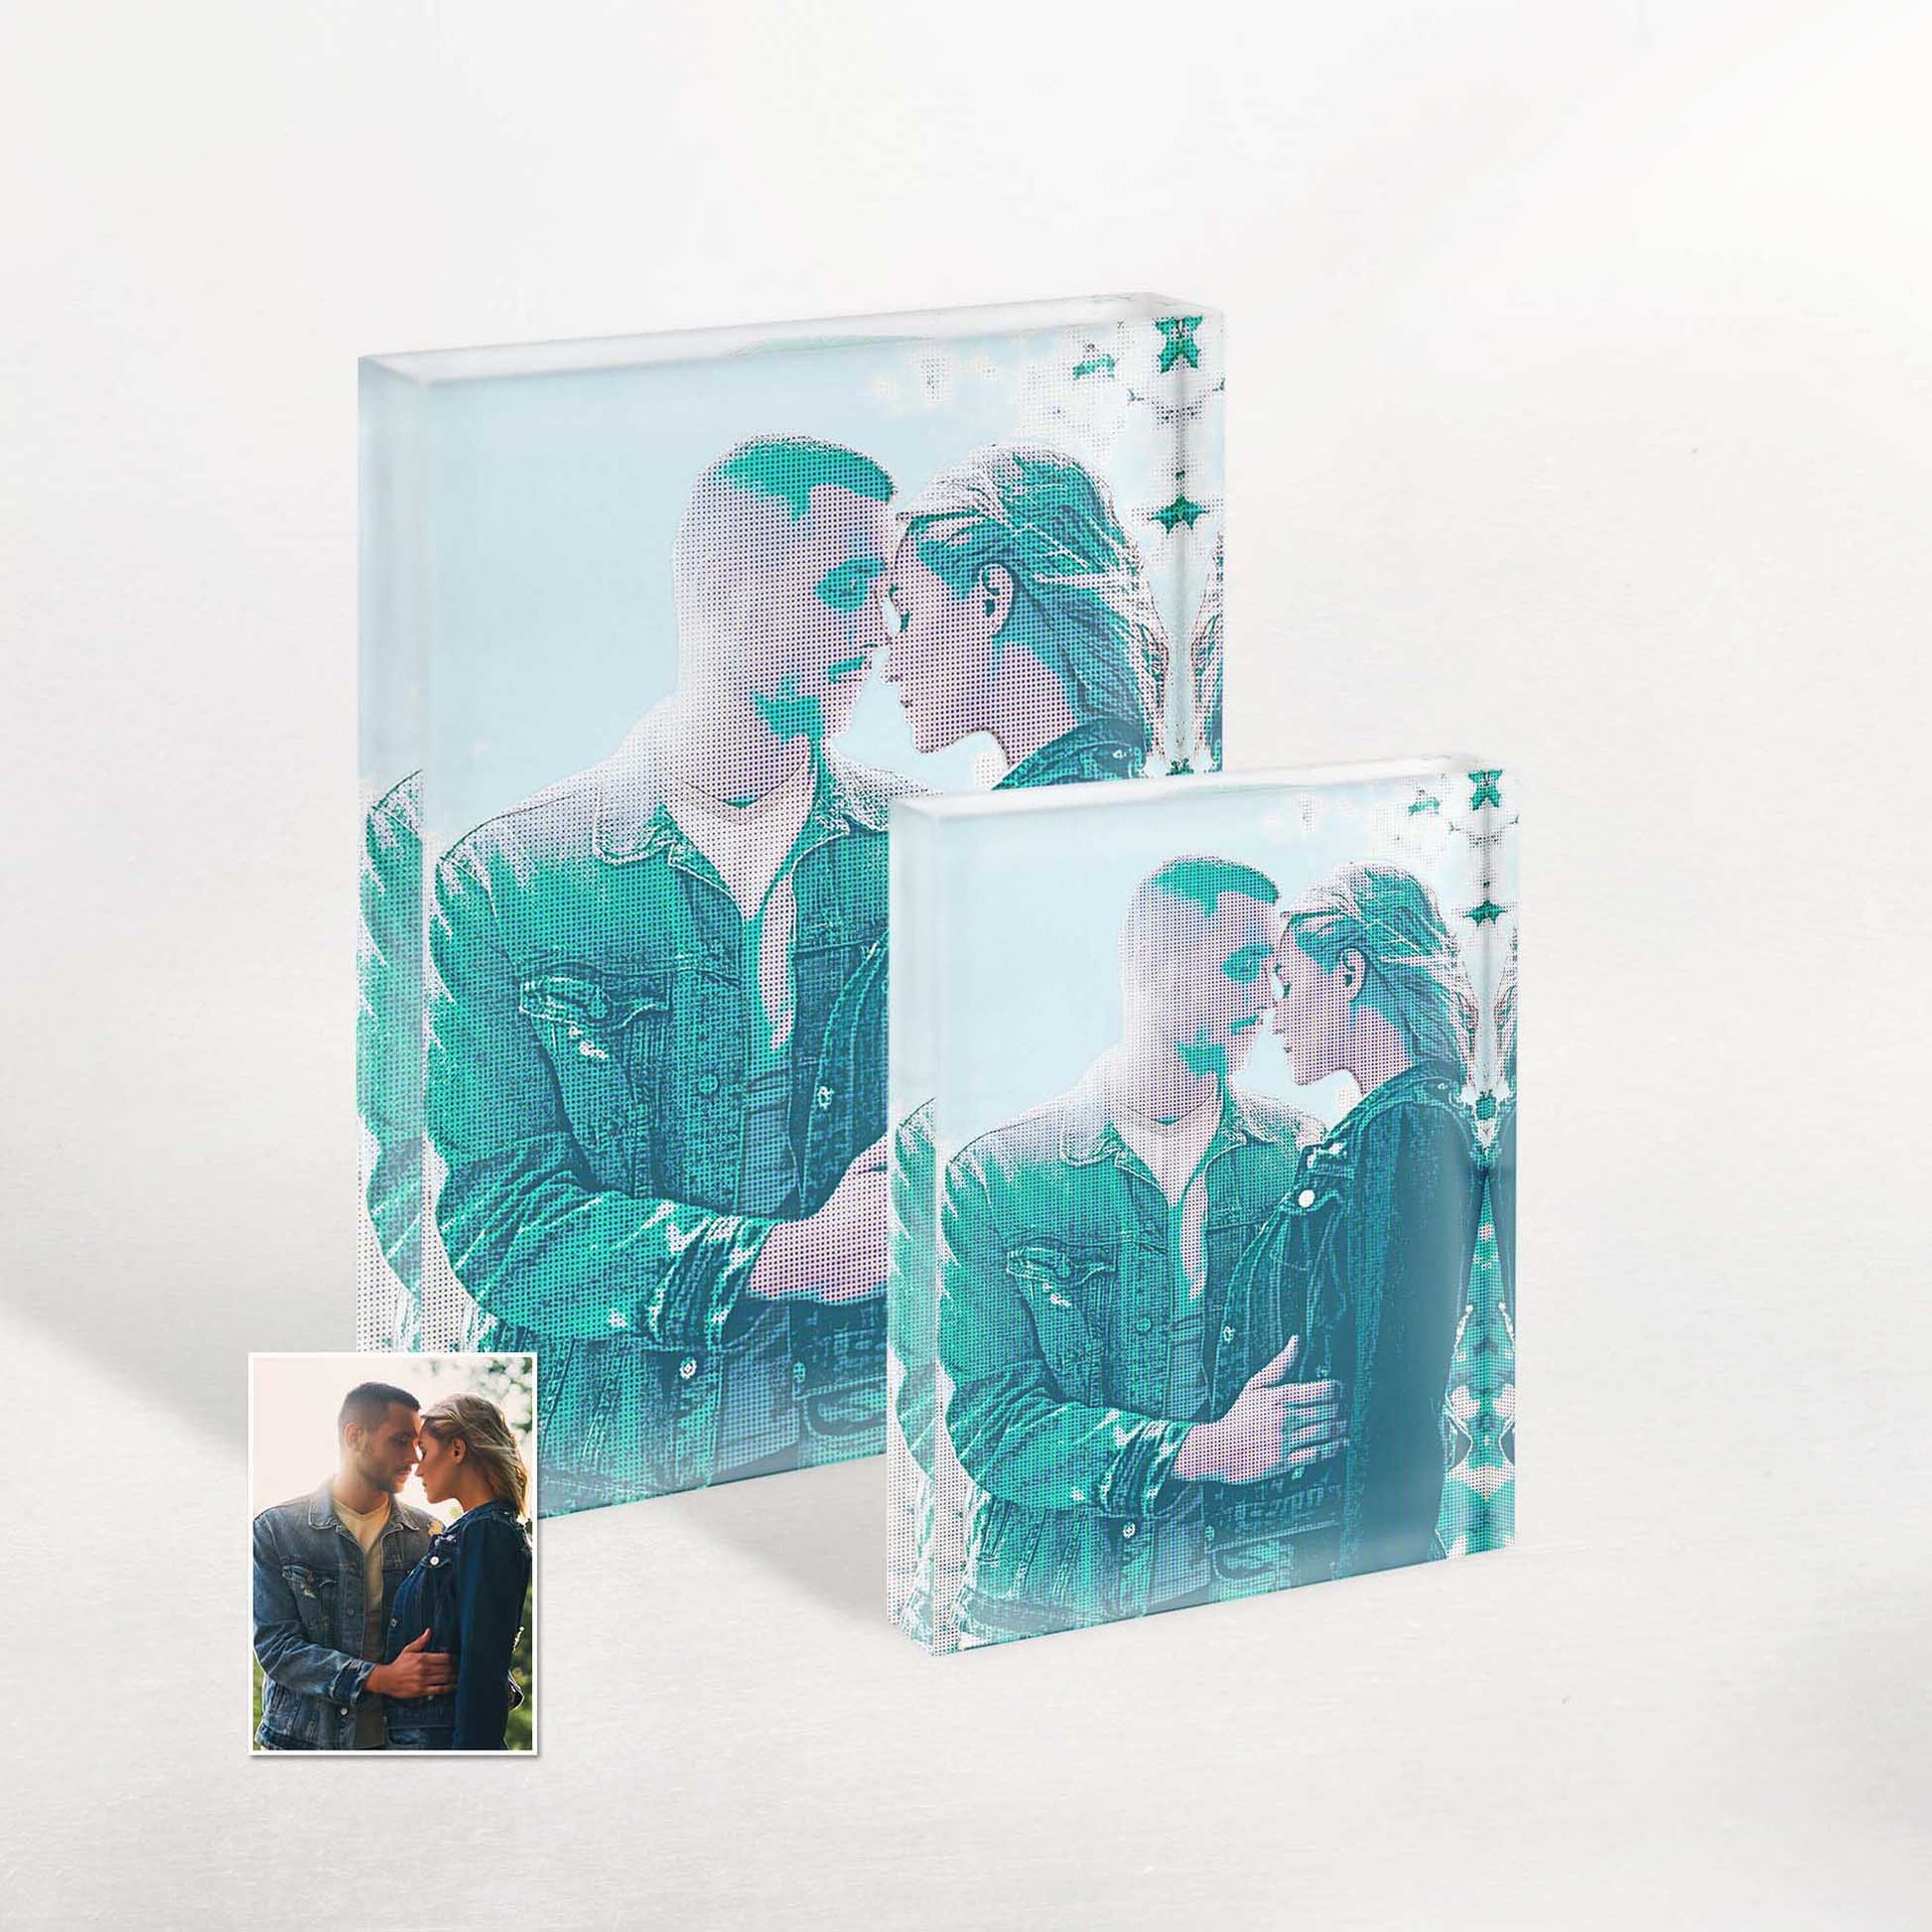 Infuse your home with a burst of freshness and vitality with the Personalised Green Grunge Acrylic Block Photo. Its oldschool-inspired halftone design adds a fun and playful element to your decor